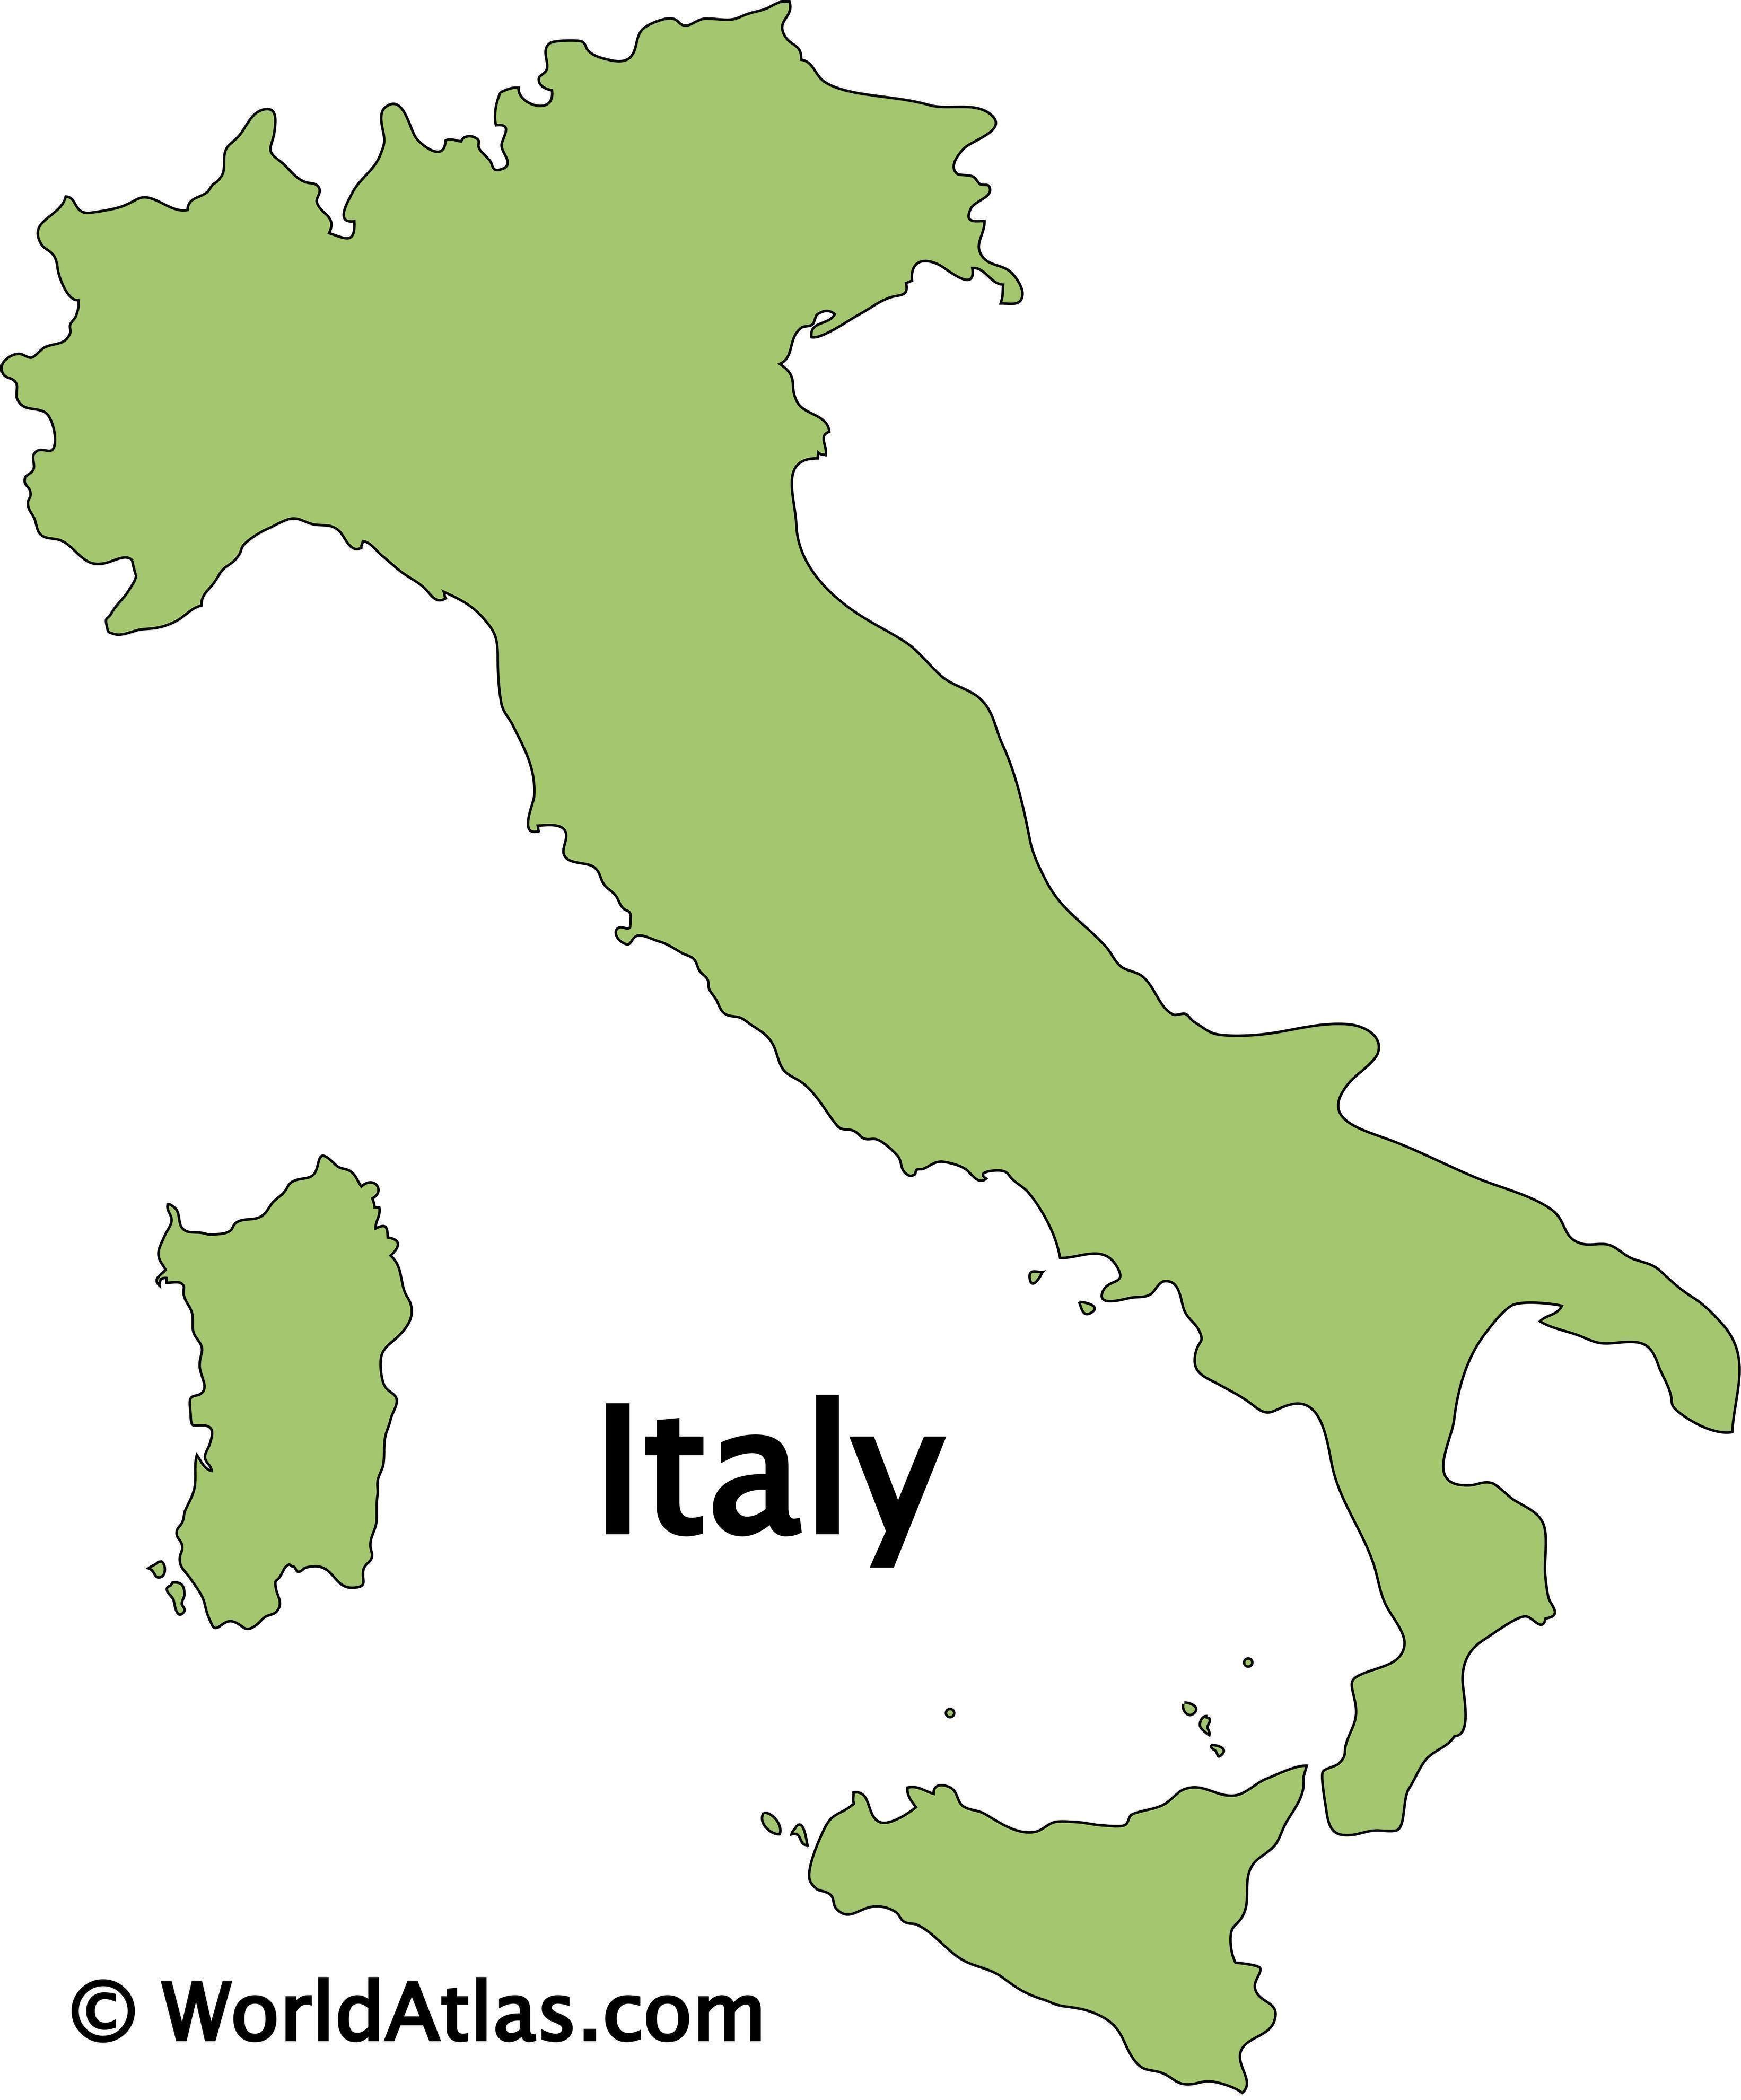 Italy Map Blank / Outline Map Of Italy With Regions Coloring Page Free